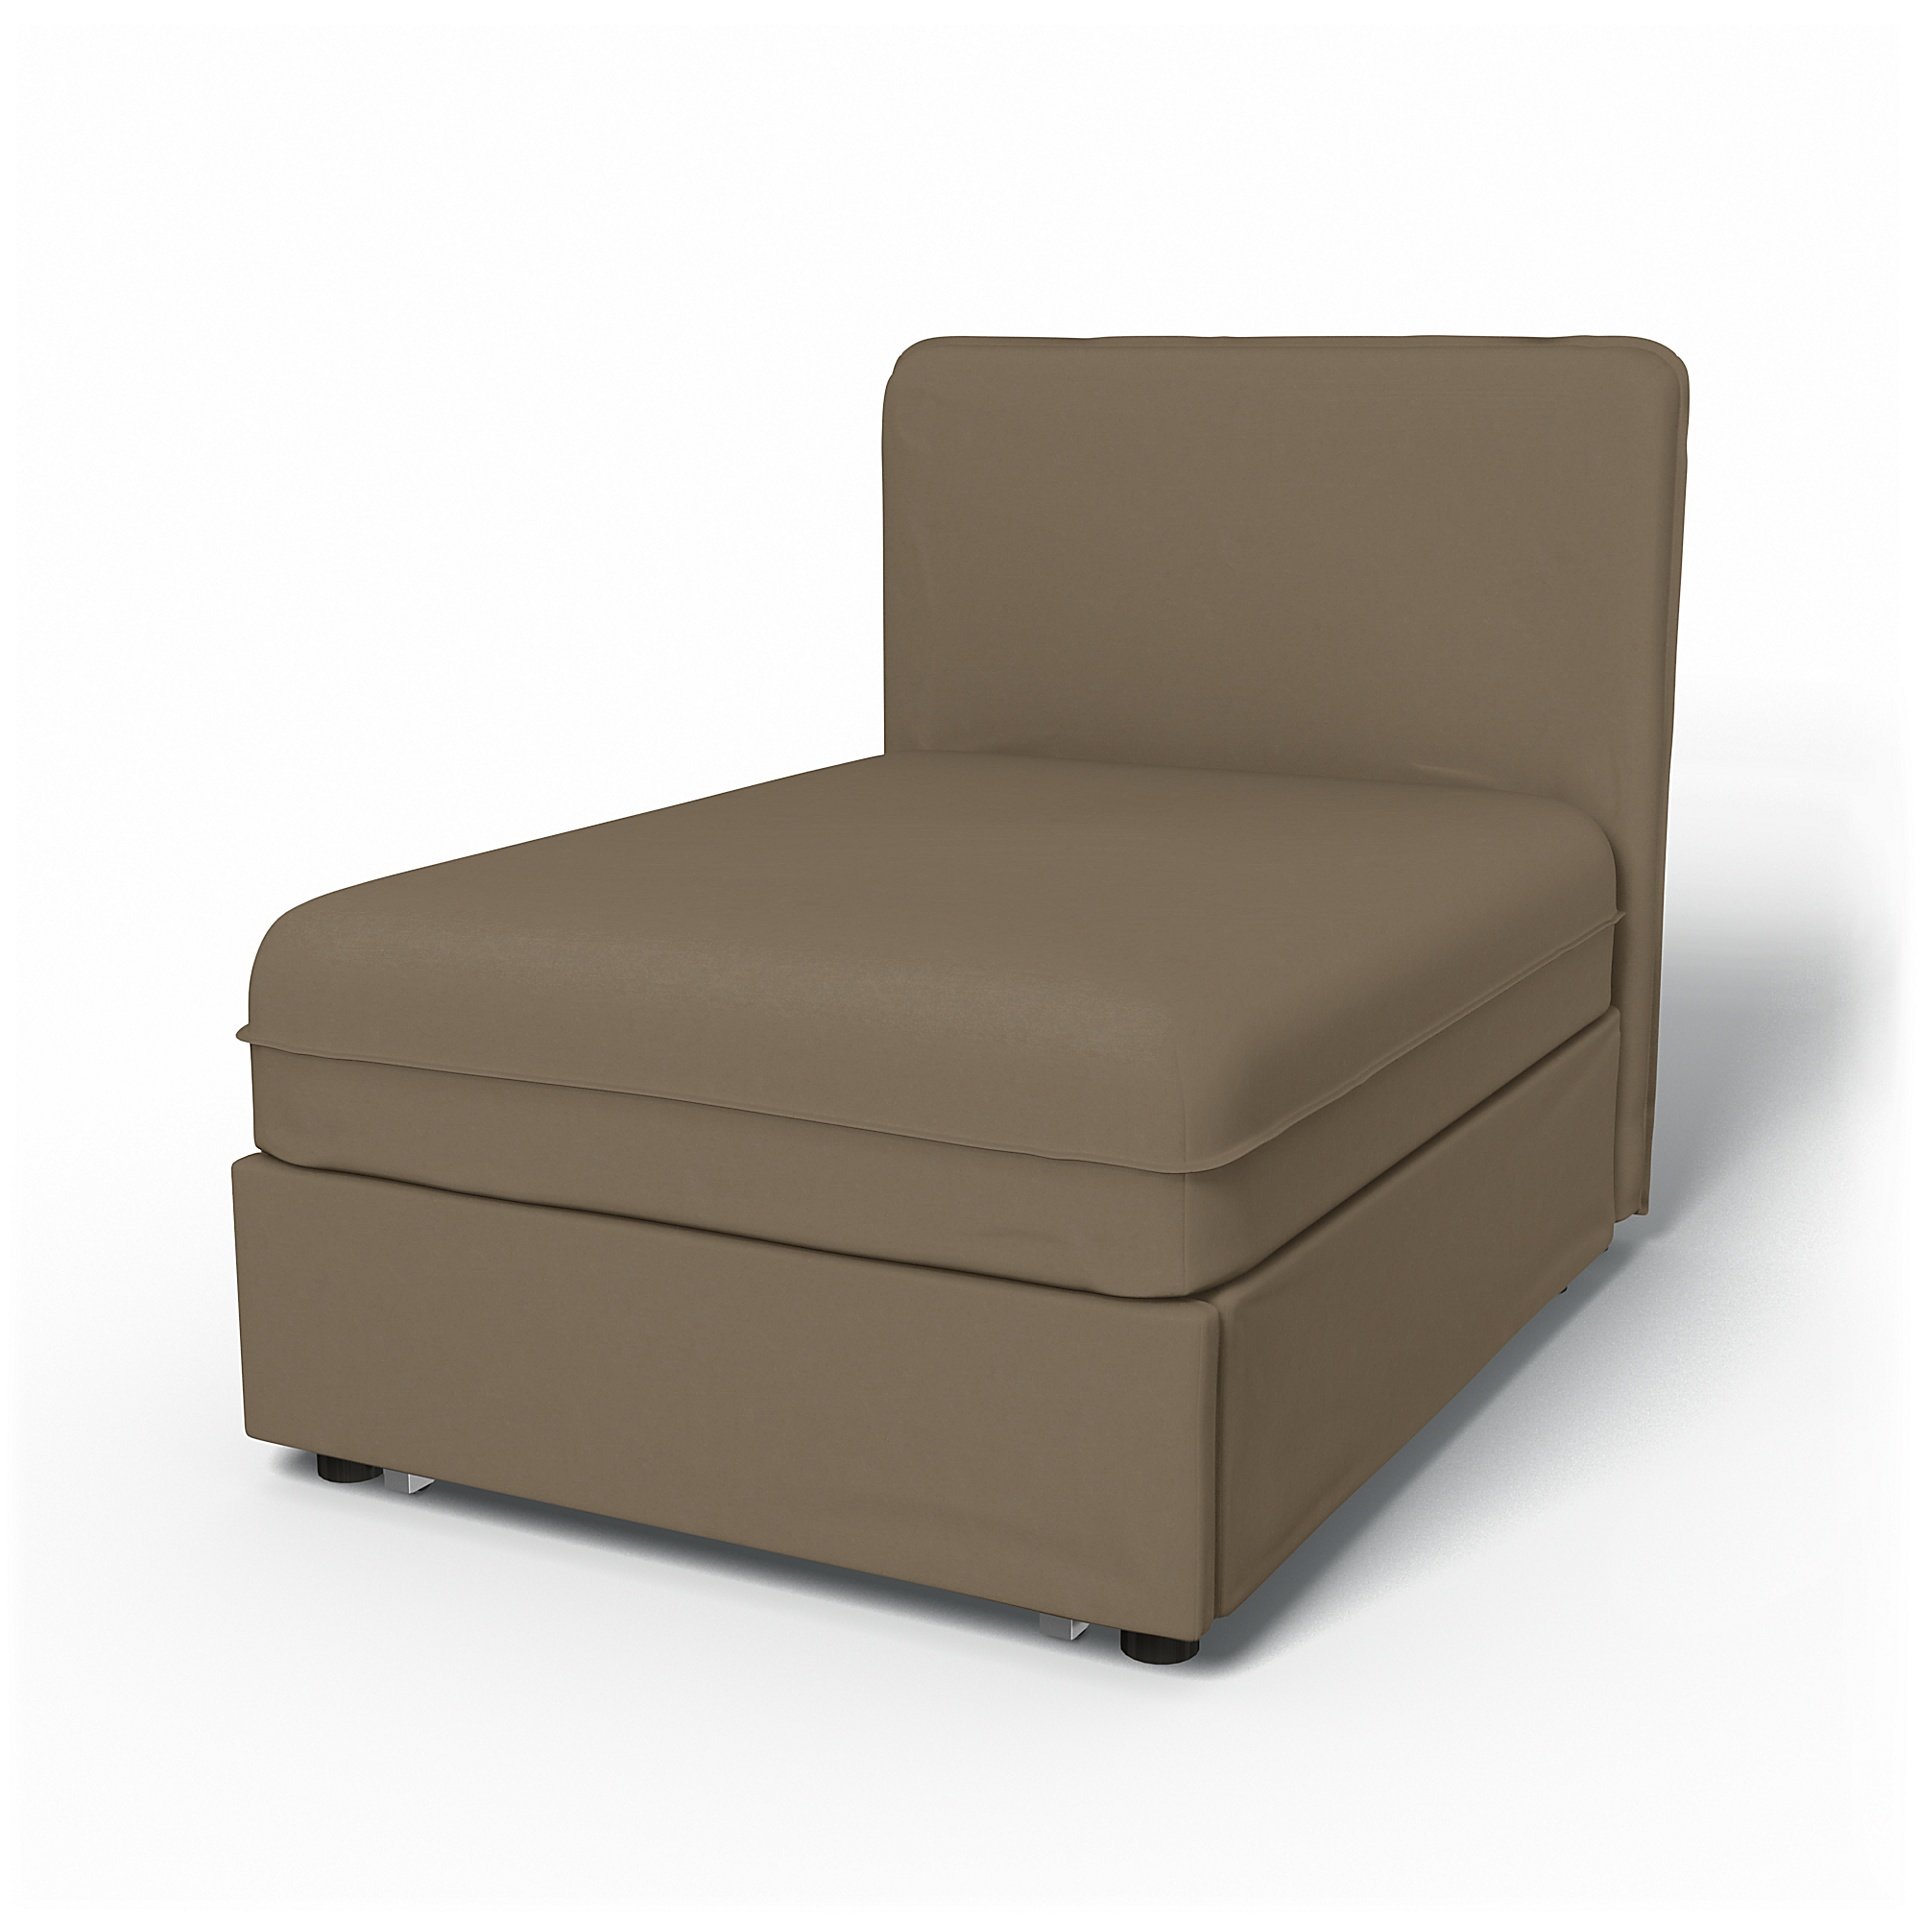 IKEA - Vallentuna Seat Module with Low Back Sofa Bed Cover 80x100 cm 32x39in, Taupe, Velvet - Bemz